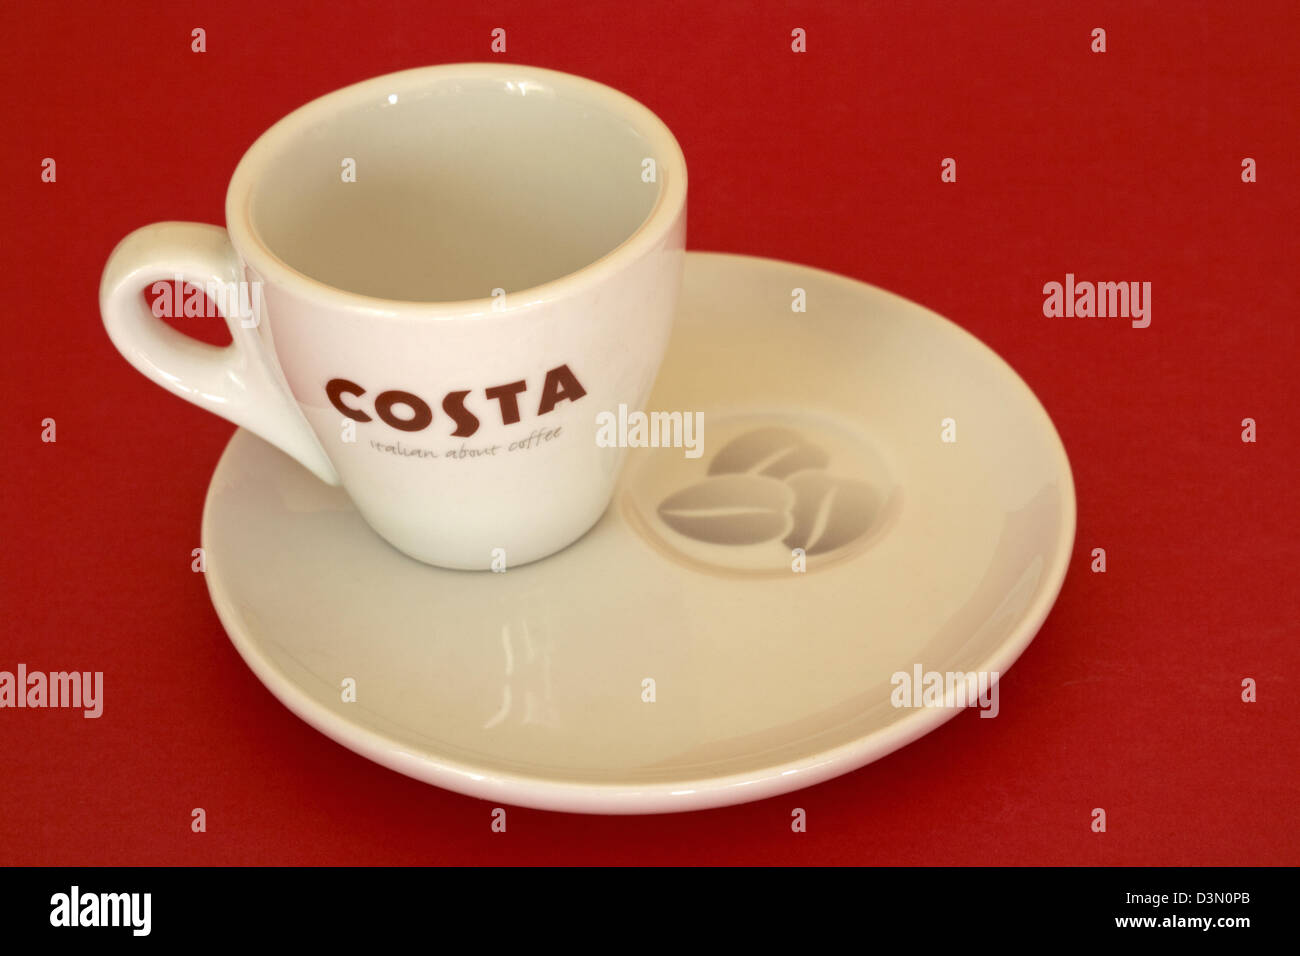 Costa Italian about coffee coffee cup on red background Stock Photo